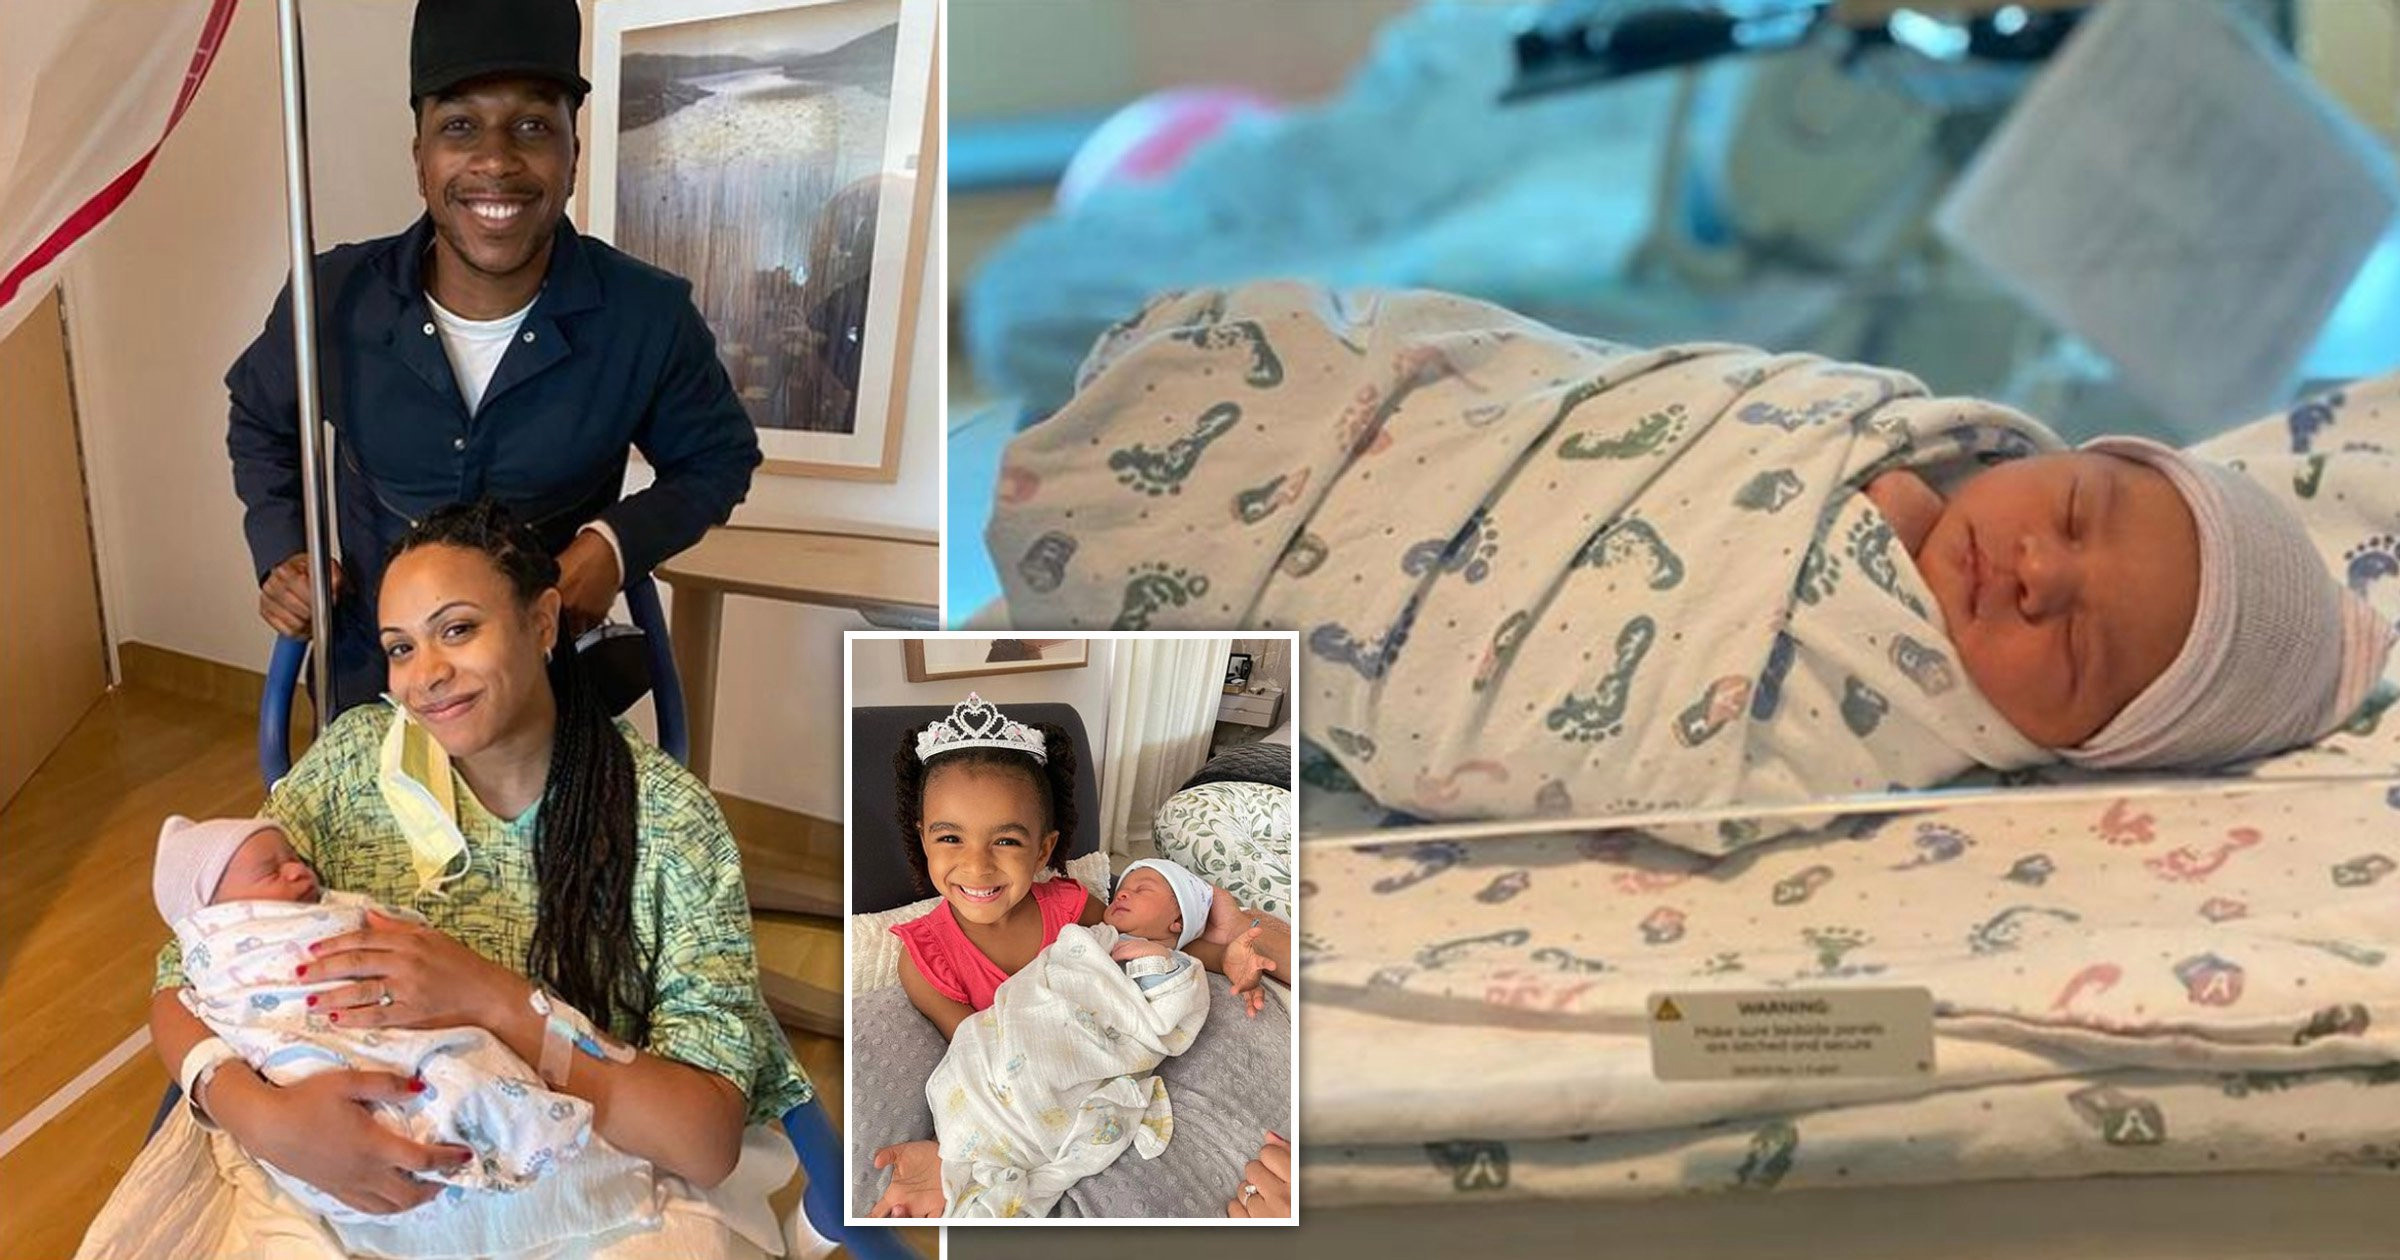 Leslie Odom Jr ‘in awe’ as he welcomes second child with wife Nicolette Robinson